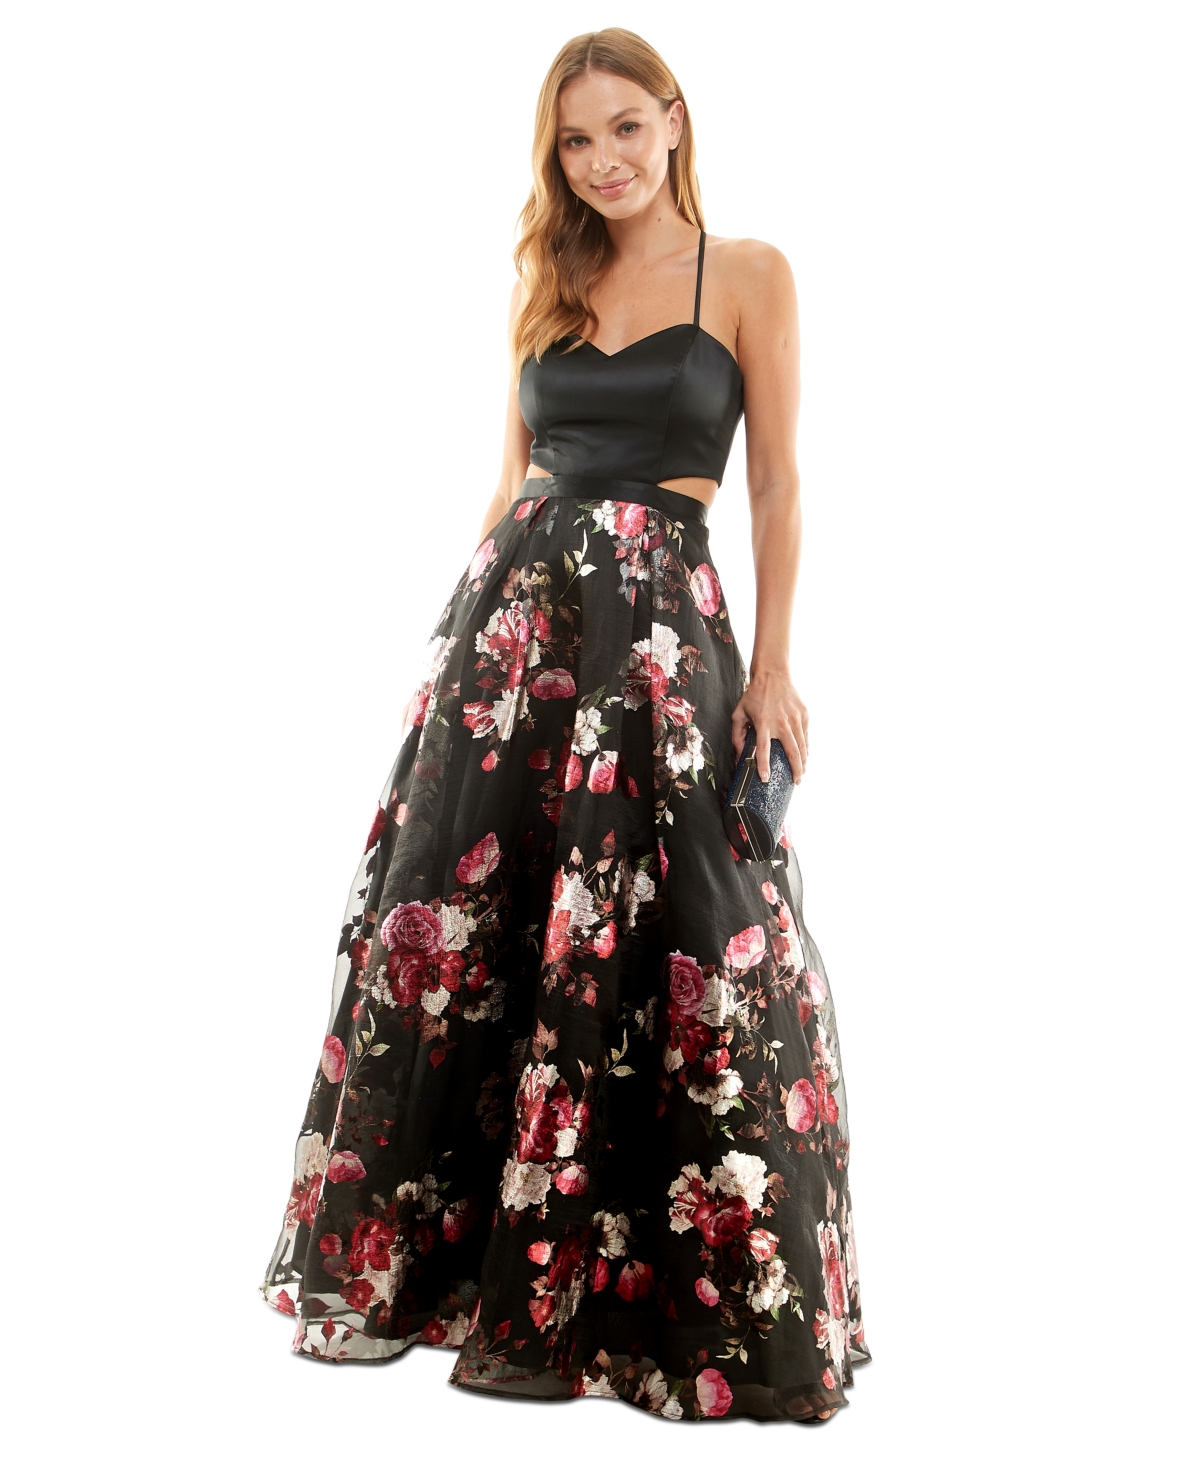 Crystal Doll Juniors' Printed-Skirt Ball Gown